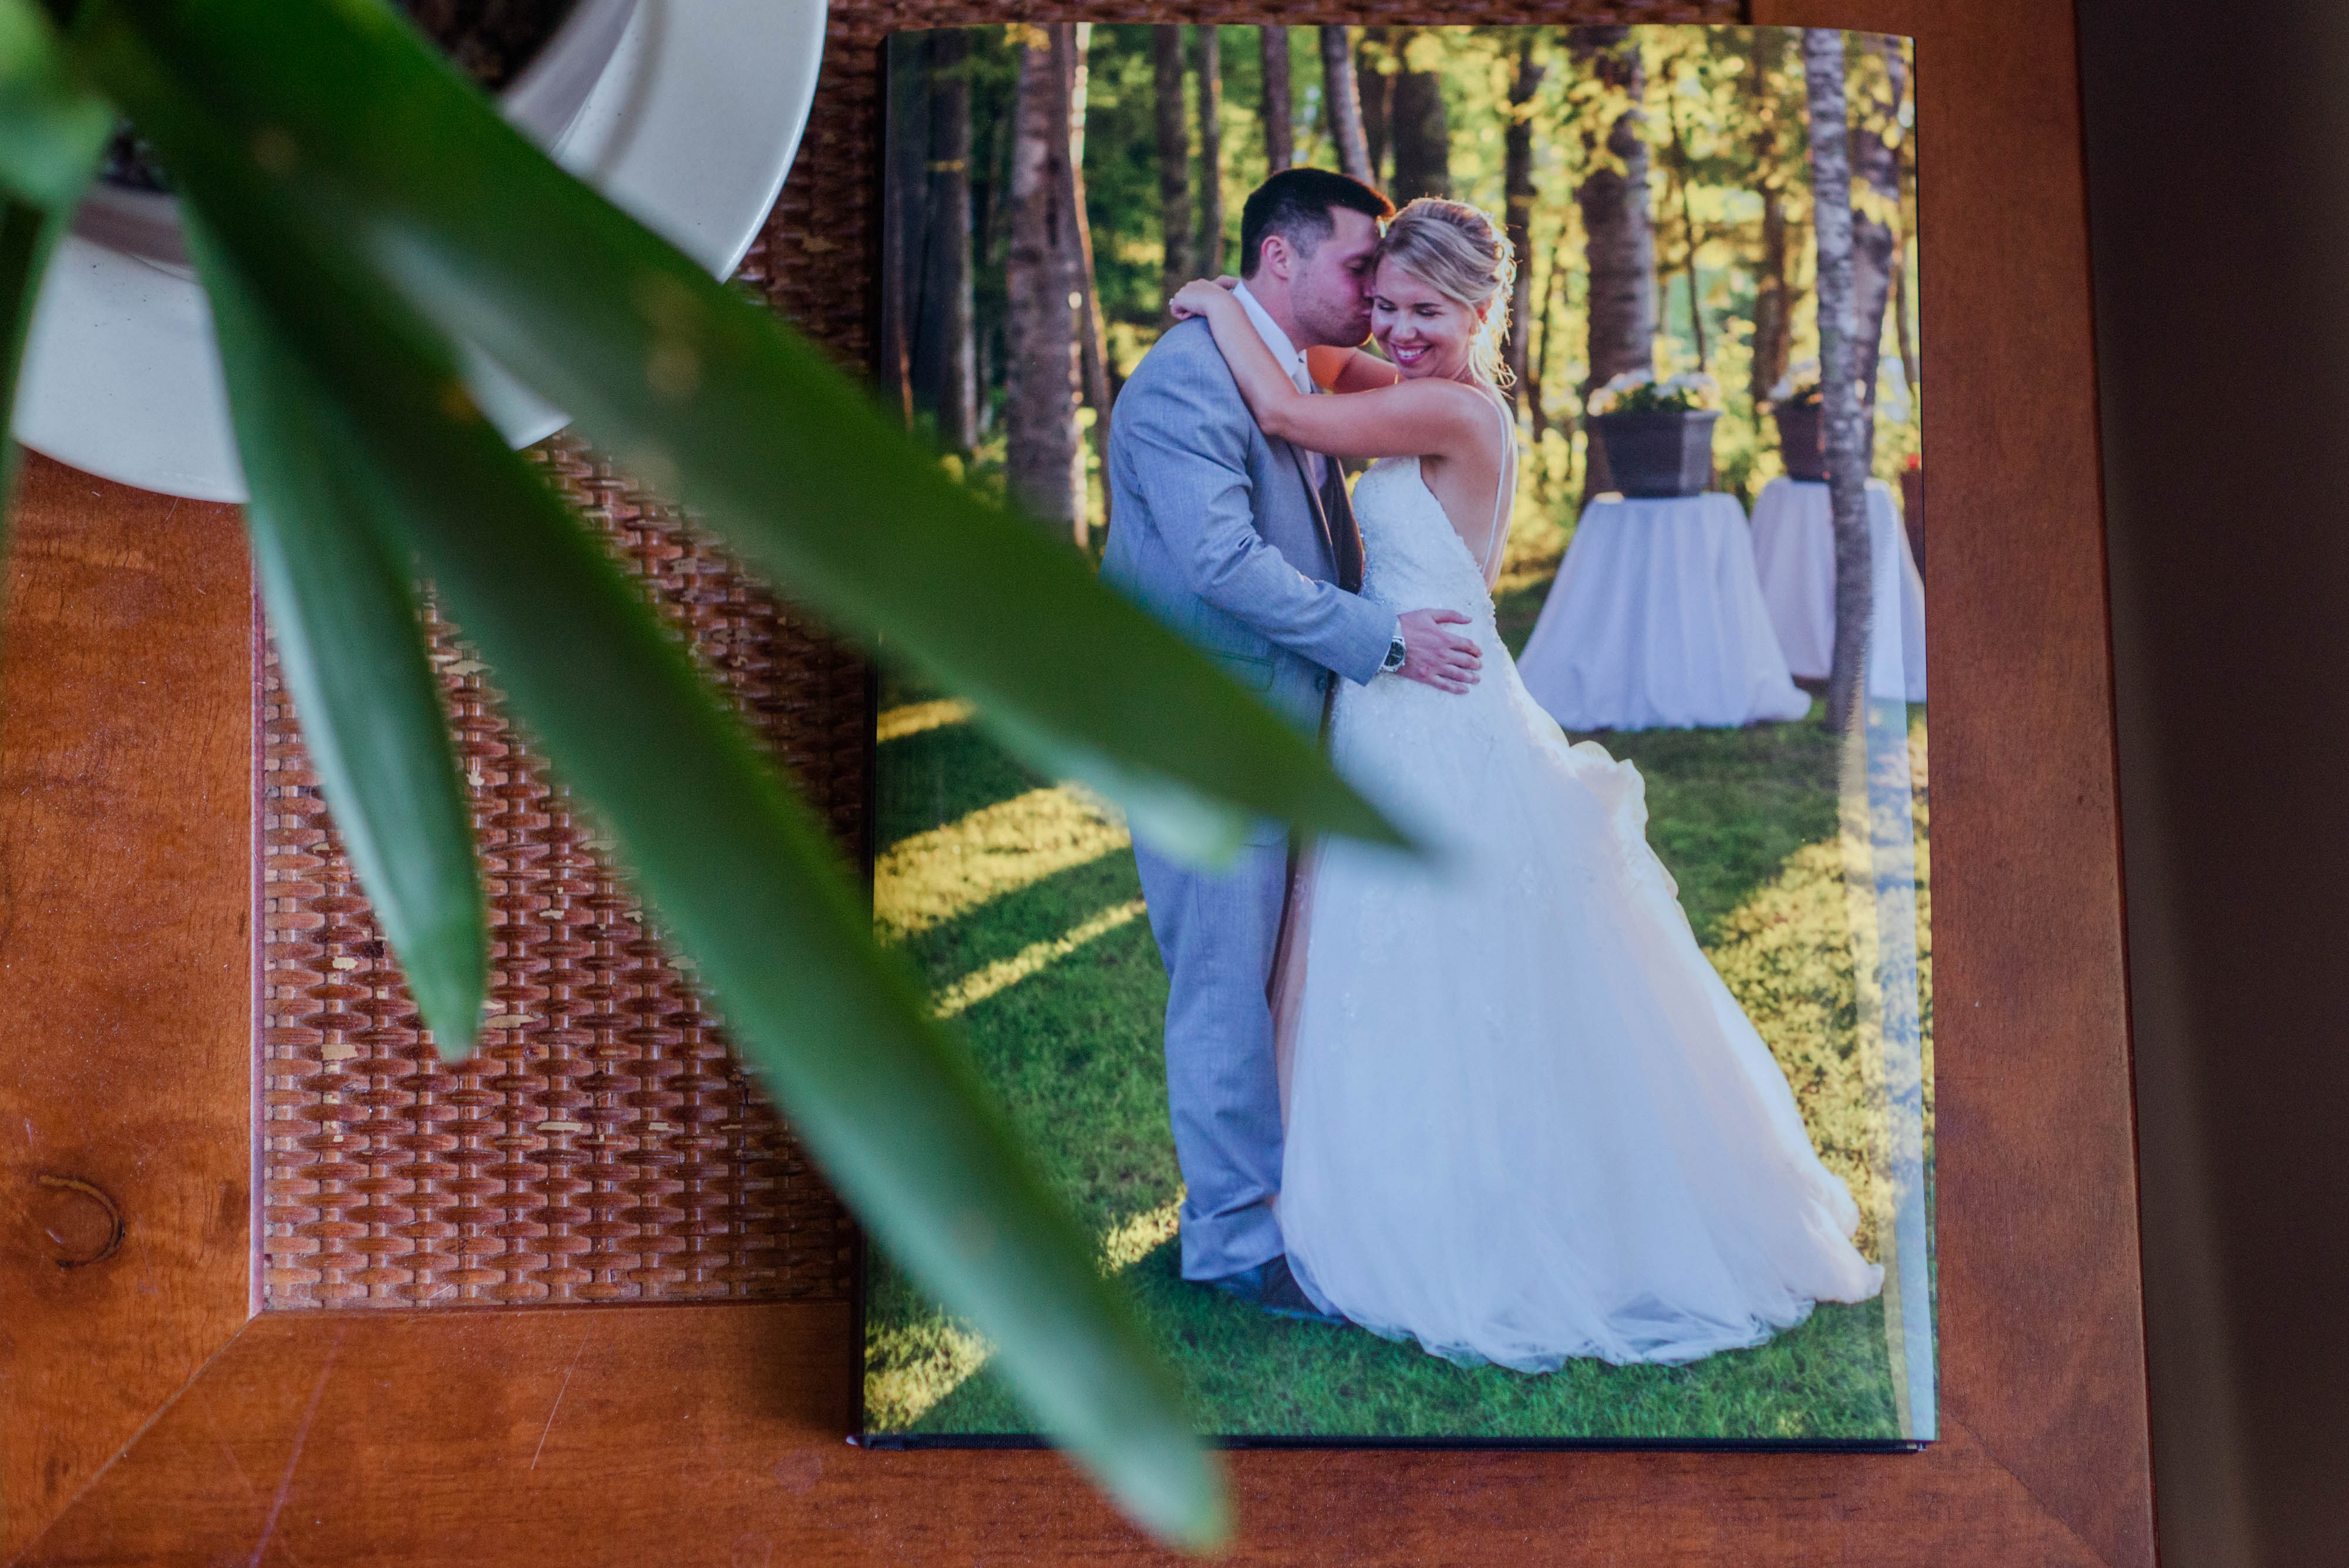 Linda has designed countless wedding albums for her clients, so here are some tips and tricks to pick out photos for YOUR wedding album!